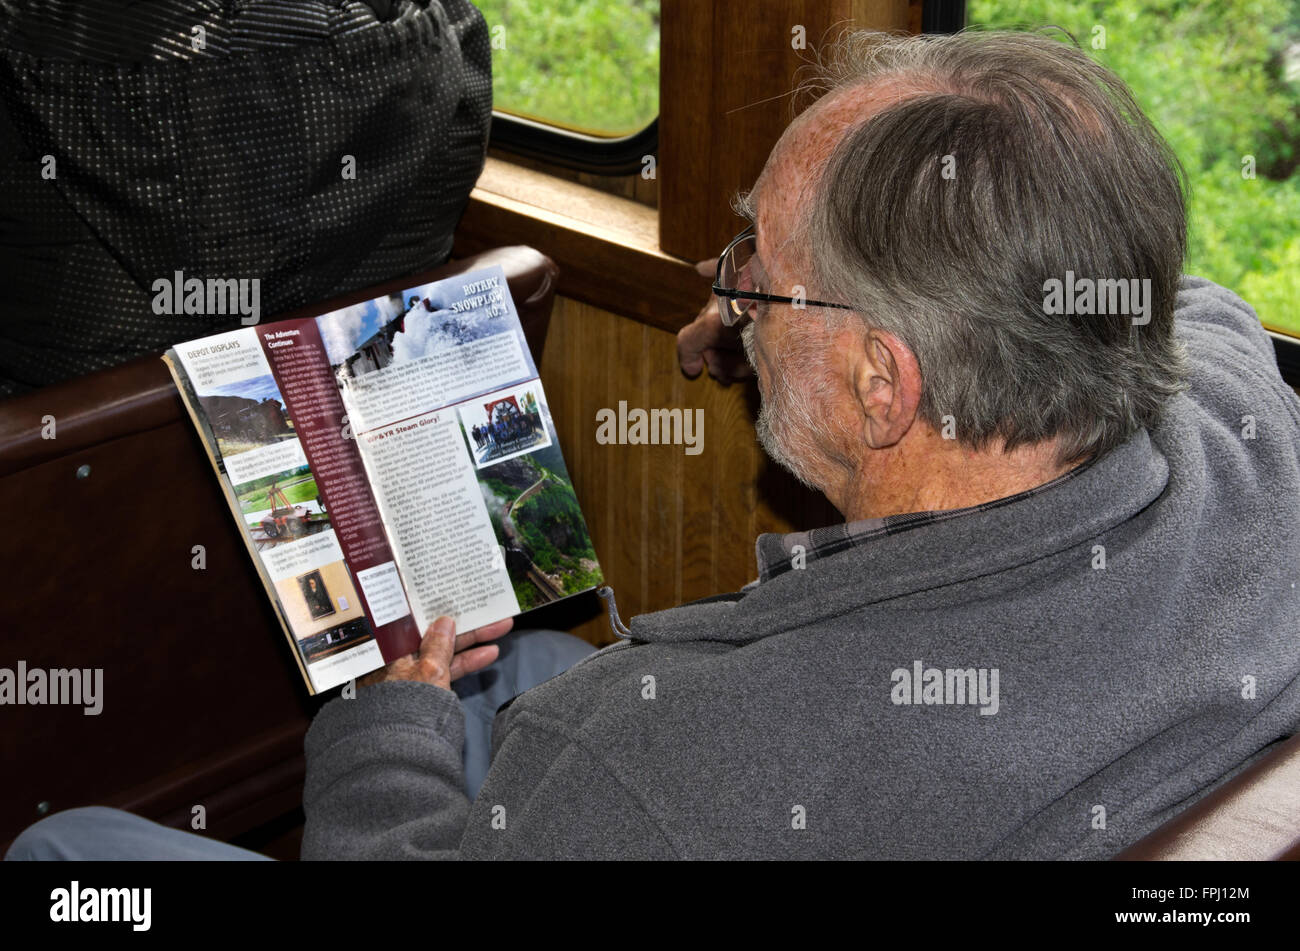 White Pass Railroad passenger in seat looks at train information Stock Photo